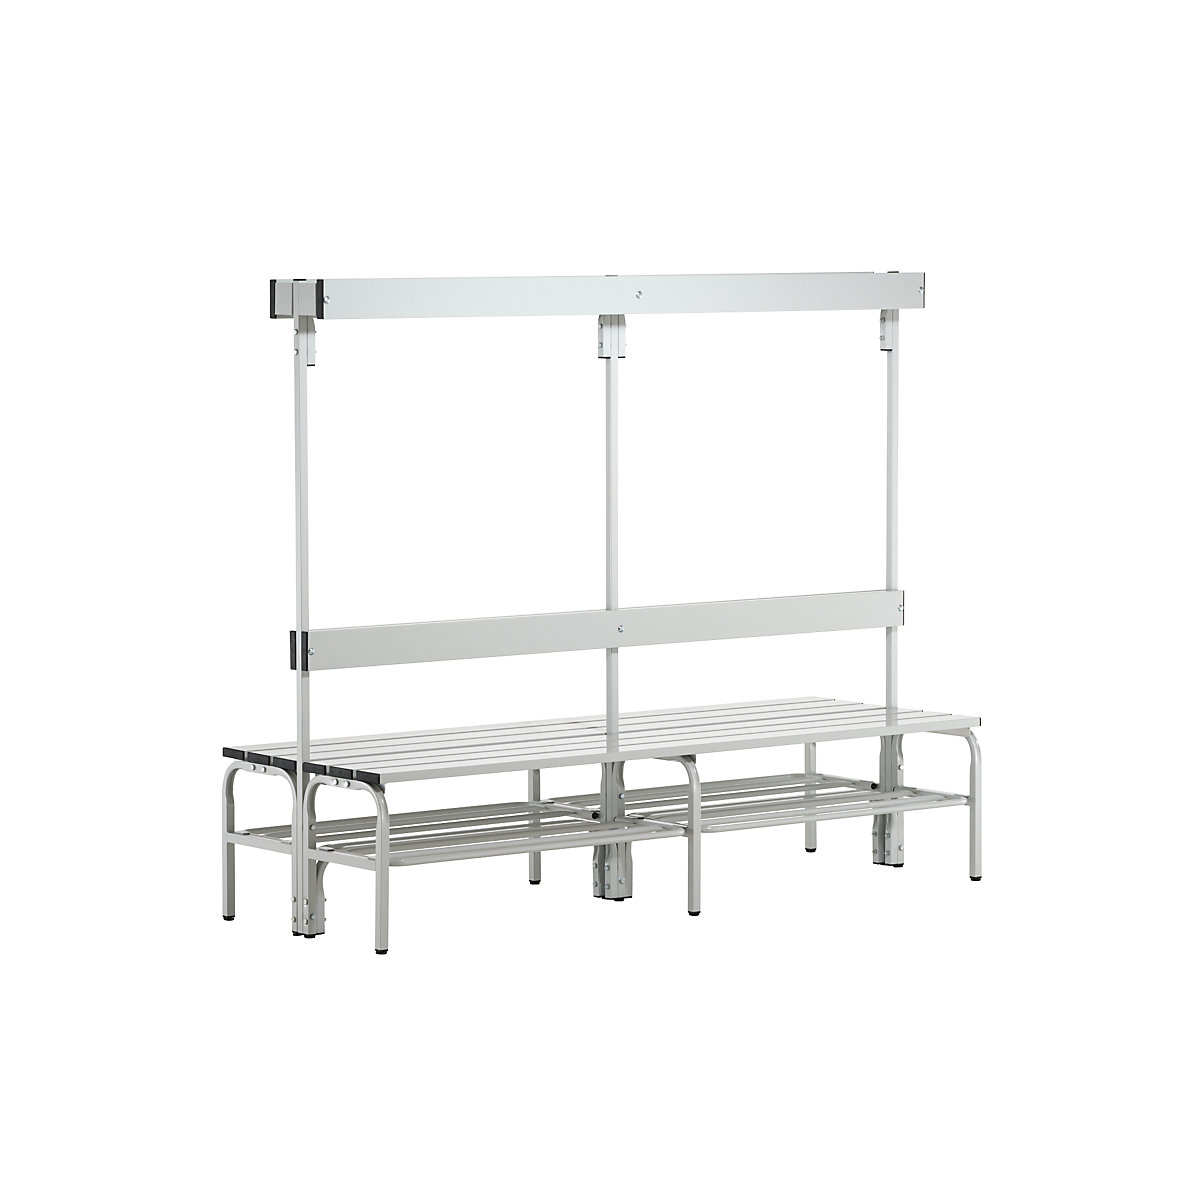 Sypro – Changing room bench made of stainless steel, HxD 1650 x 725 mm, length 1500 mm, 12 hooks, light grey, shoe rack